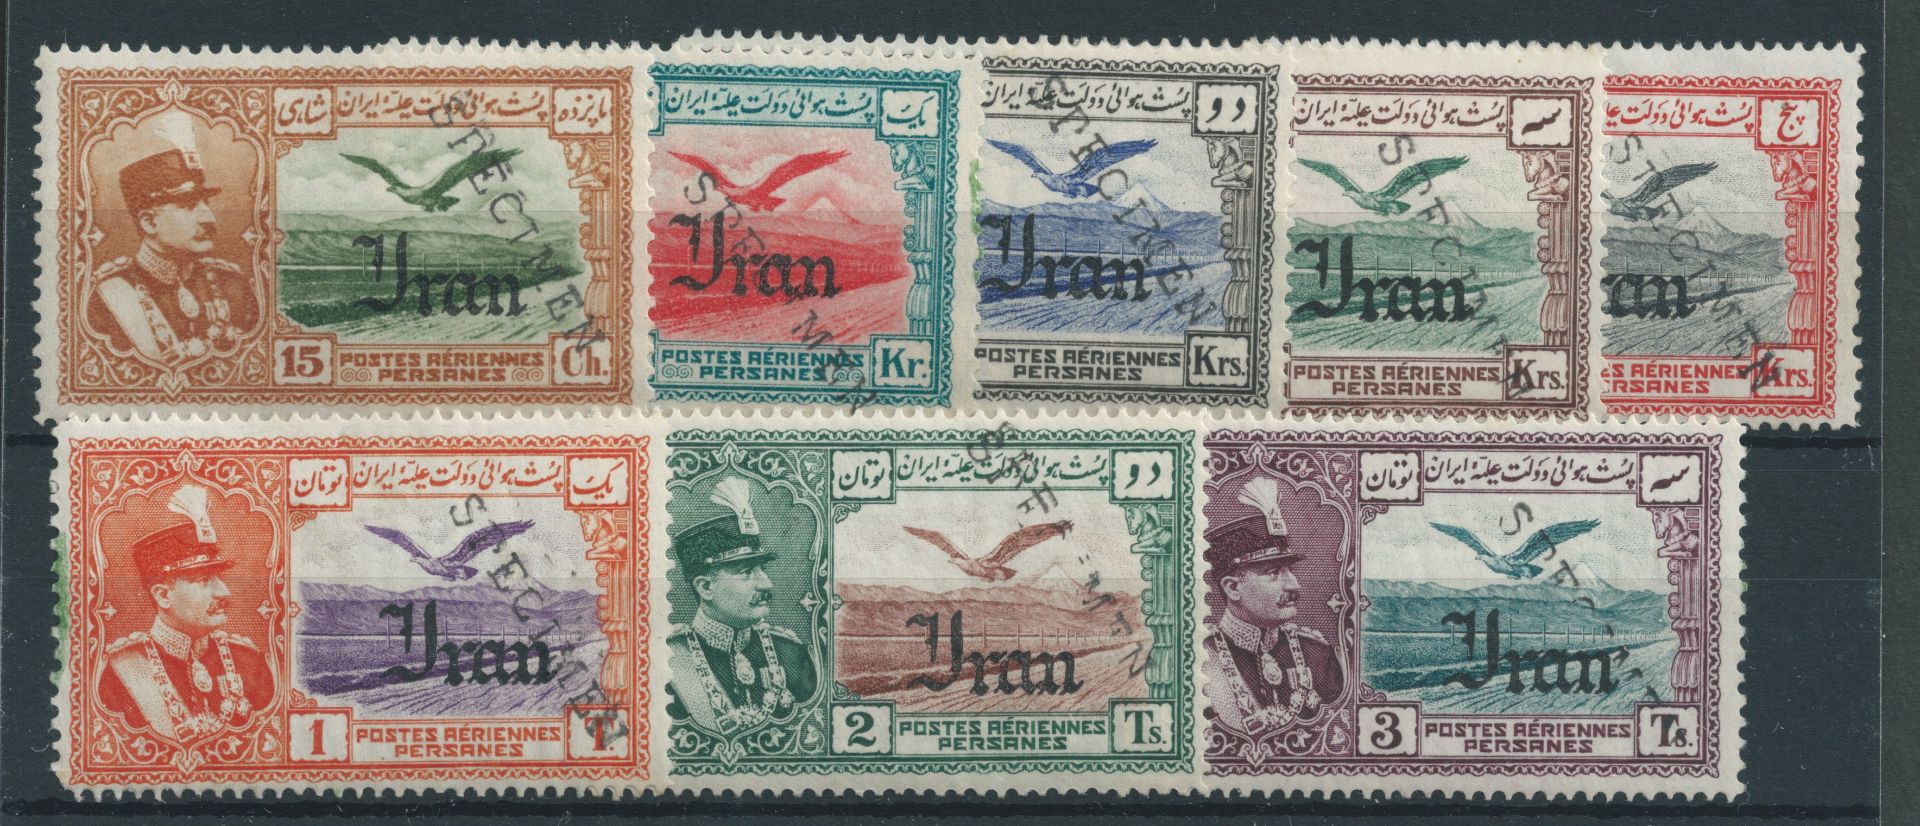 Persia 1935 Airs 1ch ro 3To, S.G. 770/786, distributed through the U.P.U. as Specimen stamps - Image 2 of 2